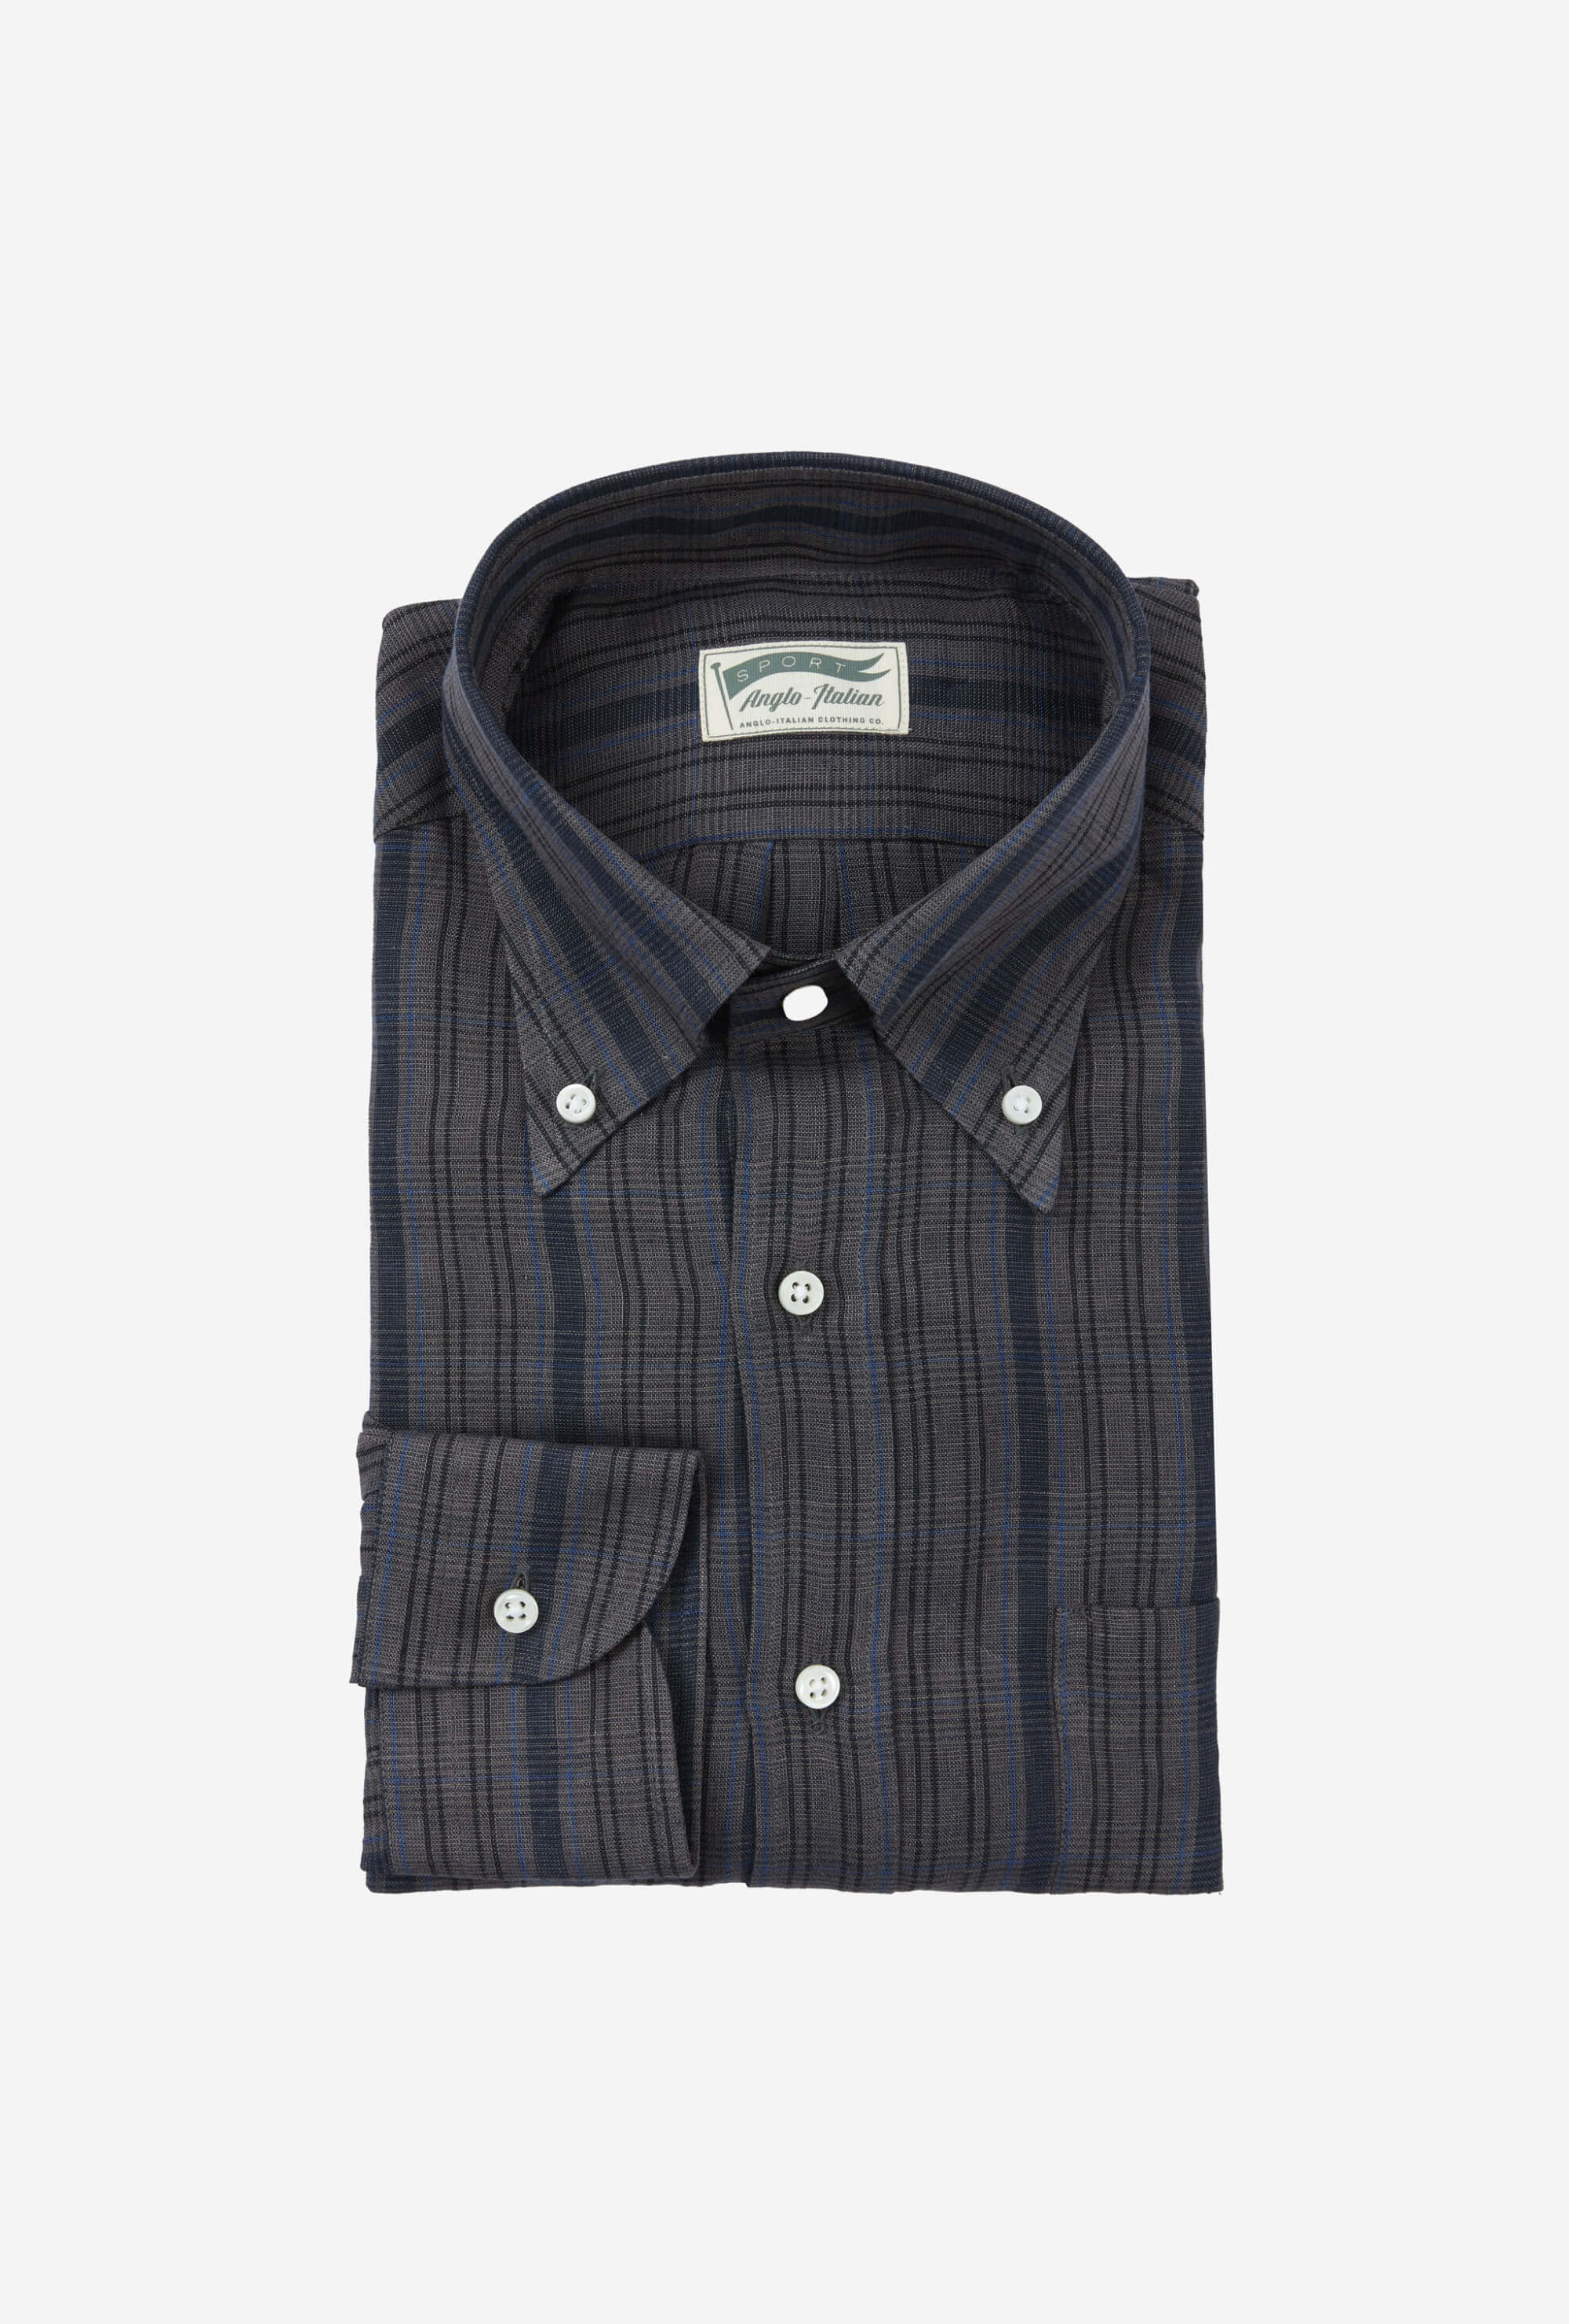 Button Down Linen Shirt Washed Madras Charcoal Navy Double Stripe